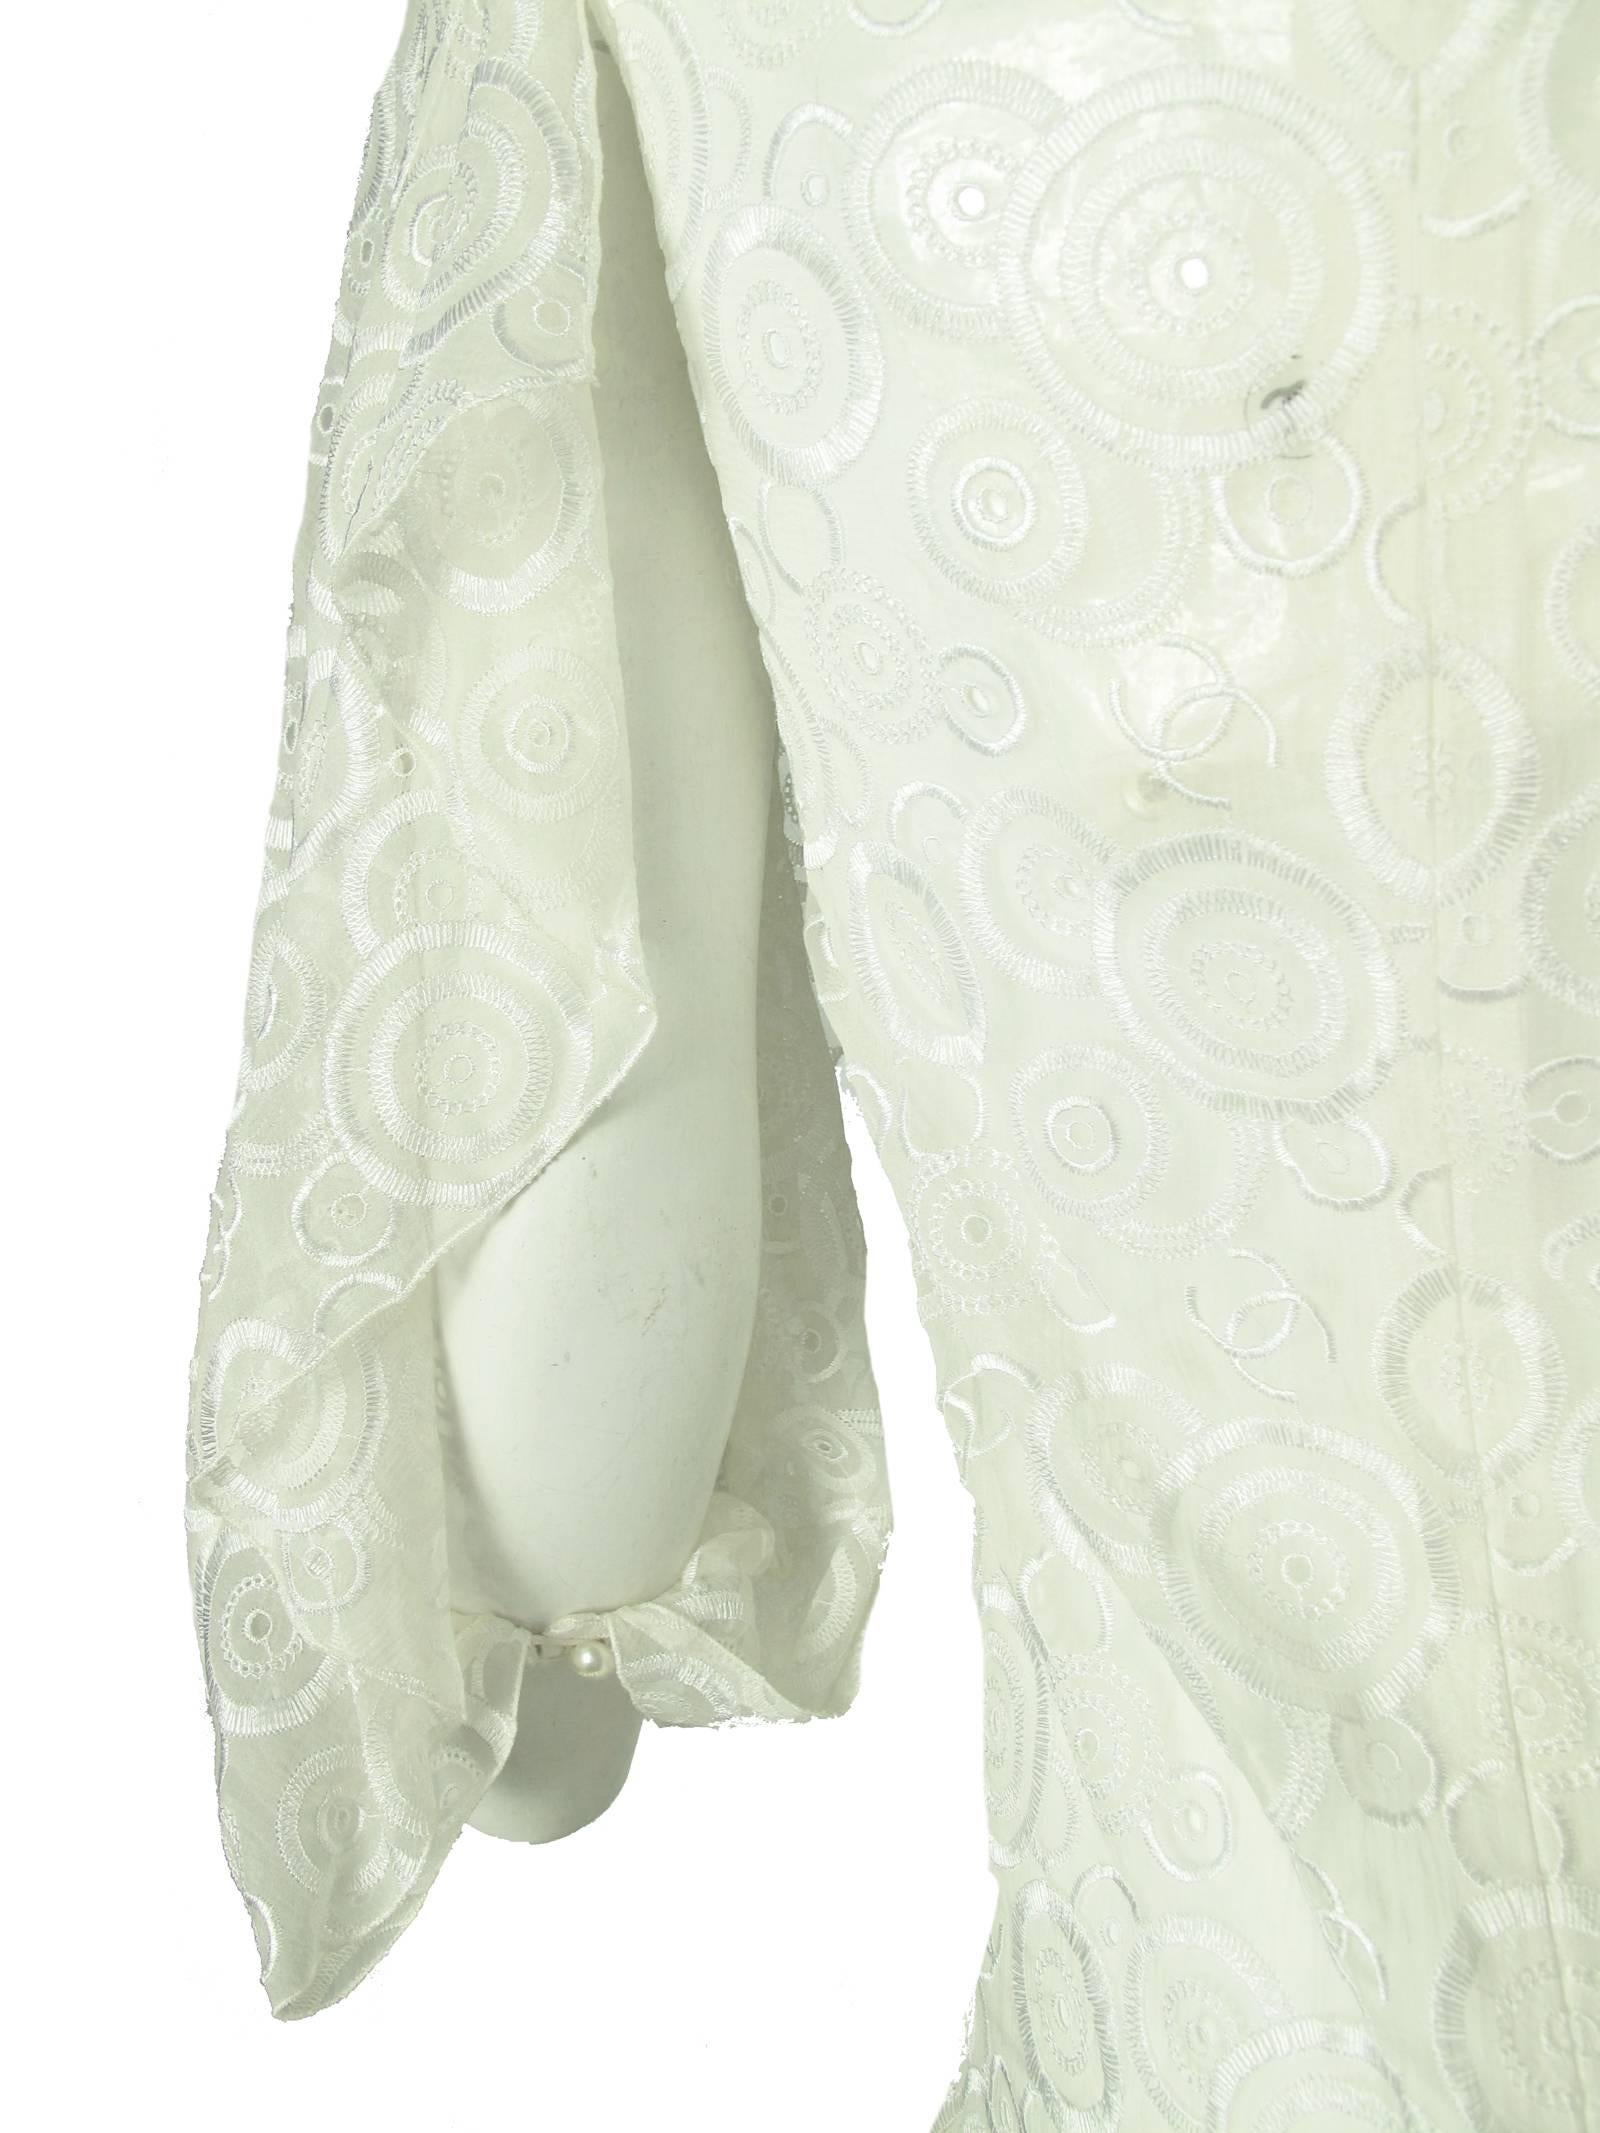 2001 Chanel White Lace Dress with 